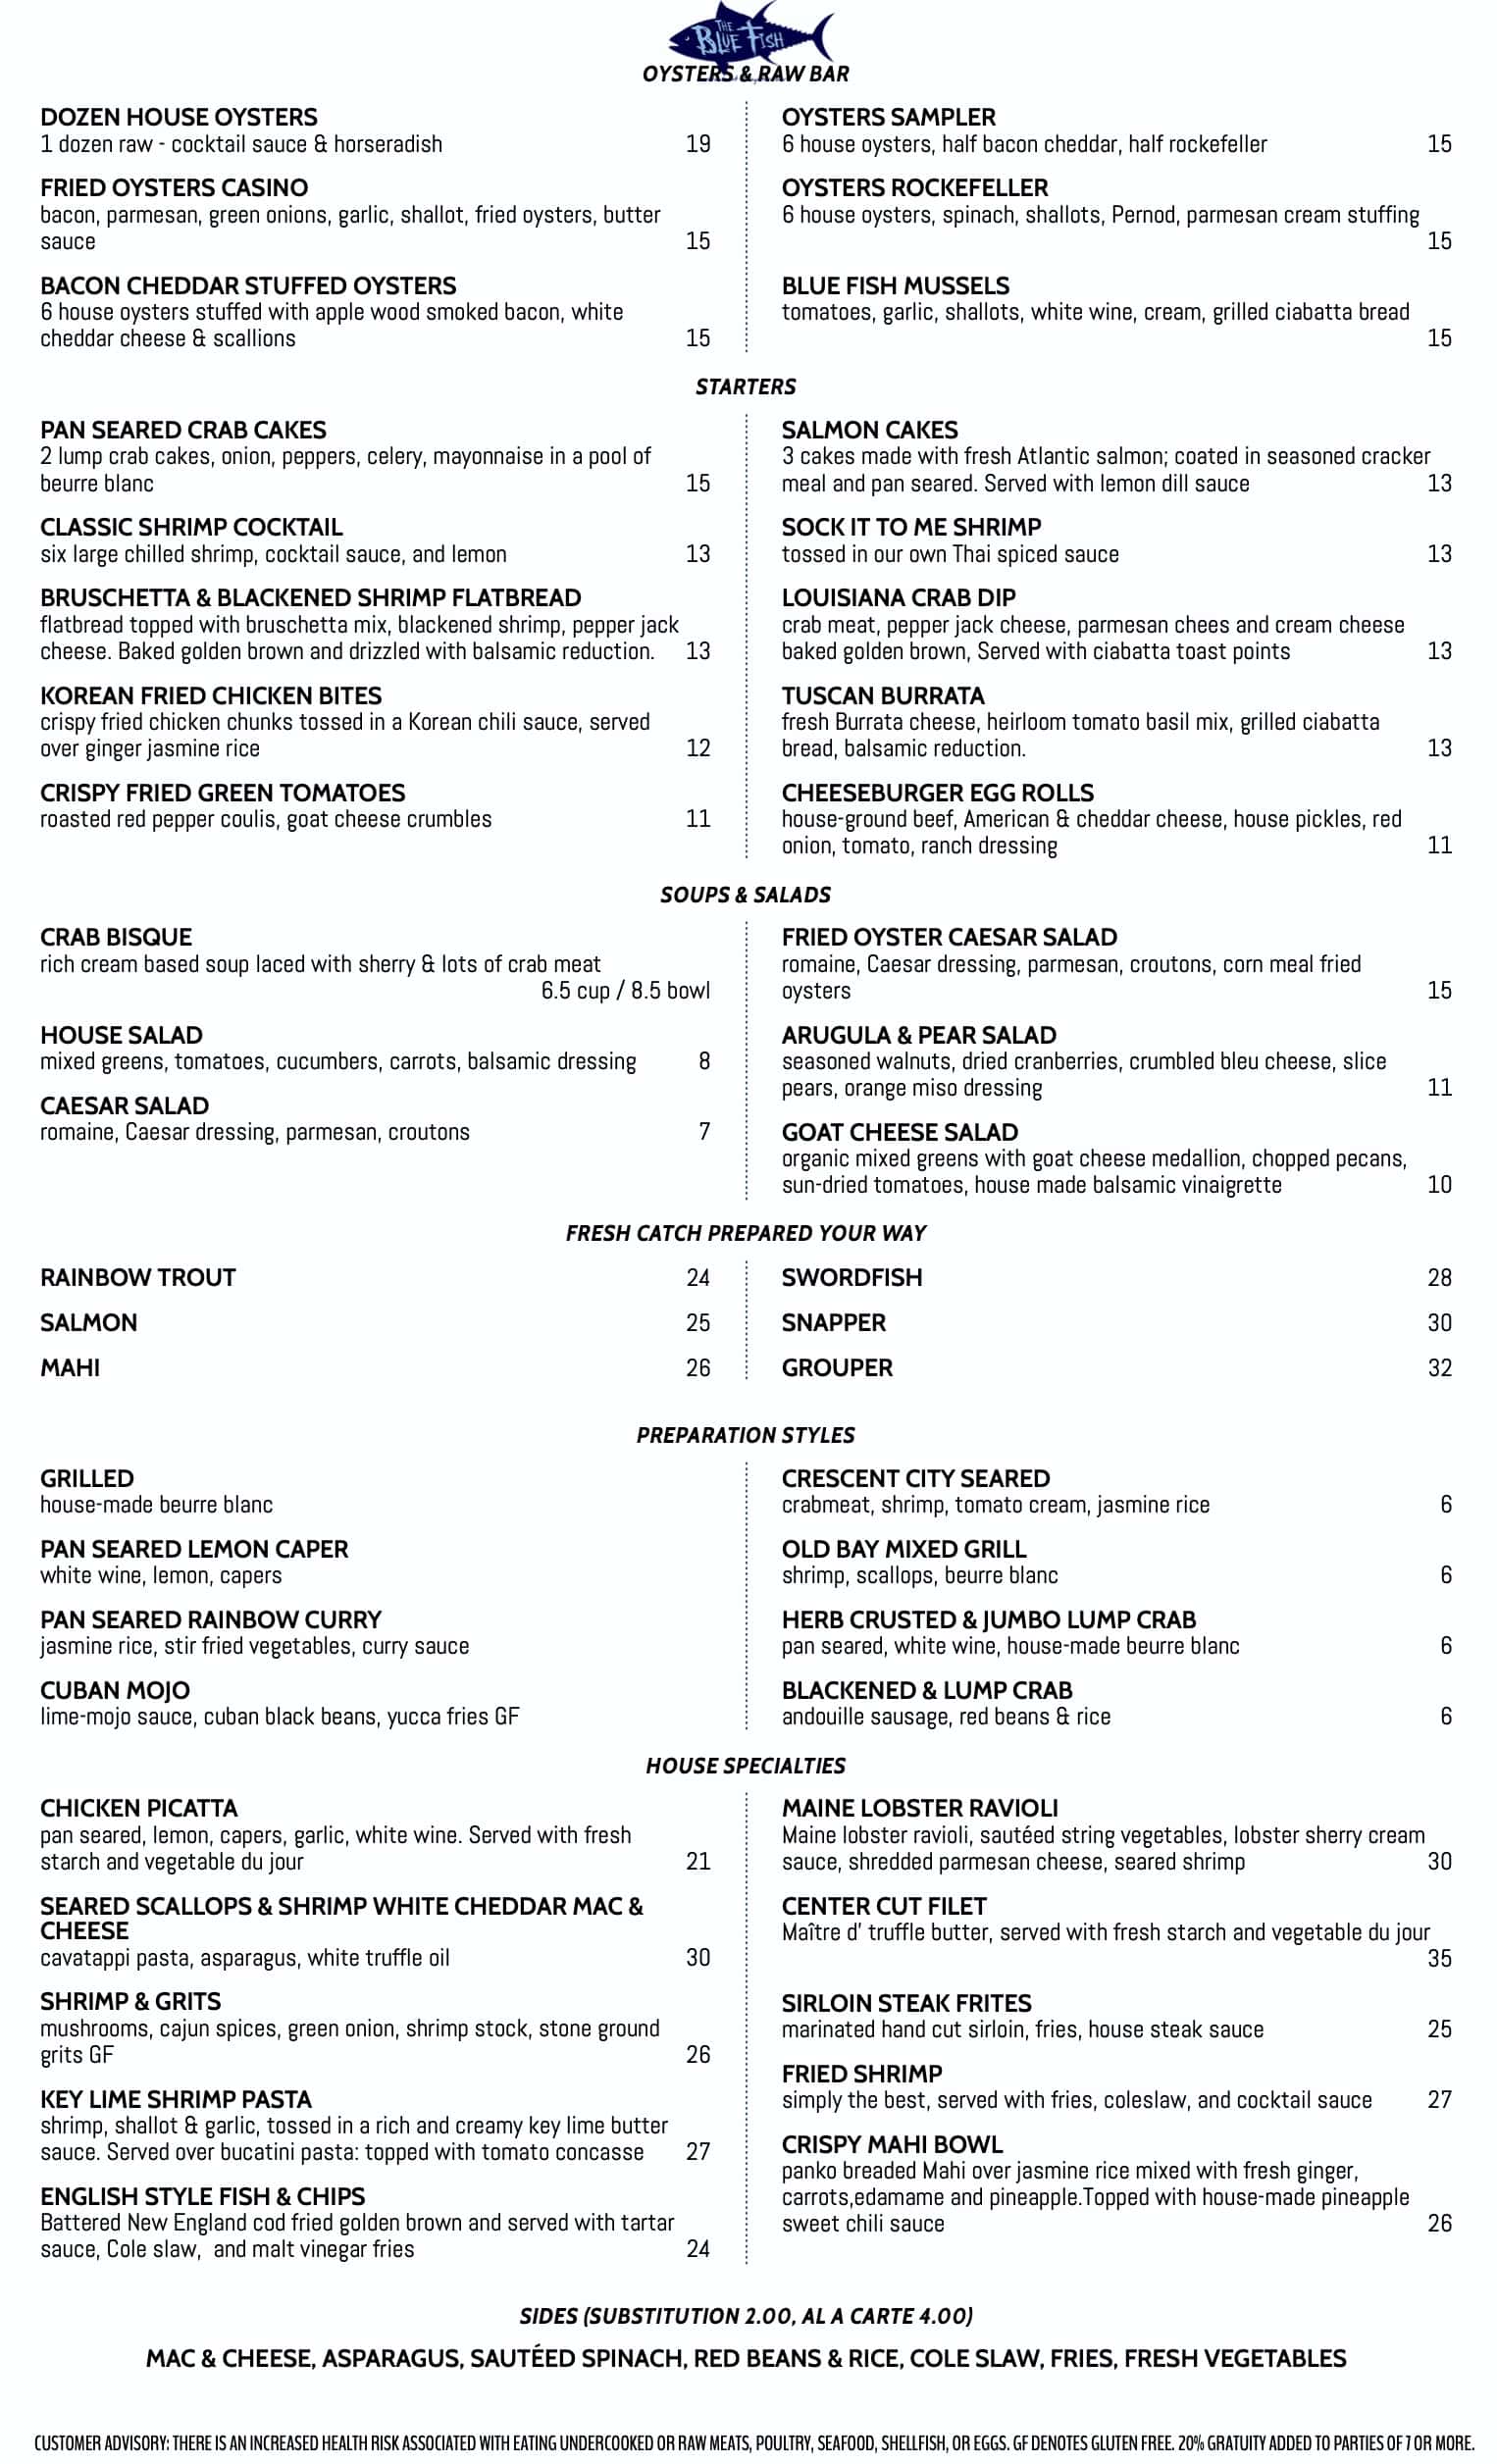 The Blue Fish Restaurant and Oyster Bar Dinner Menu